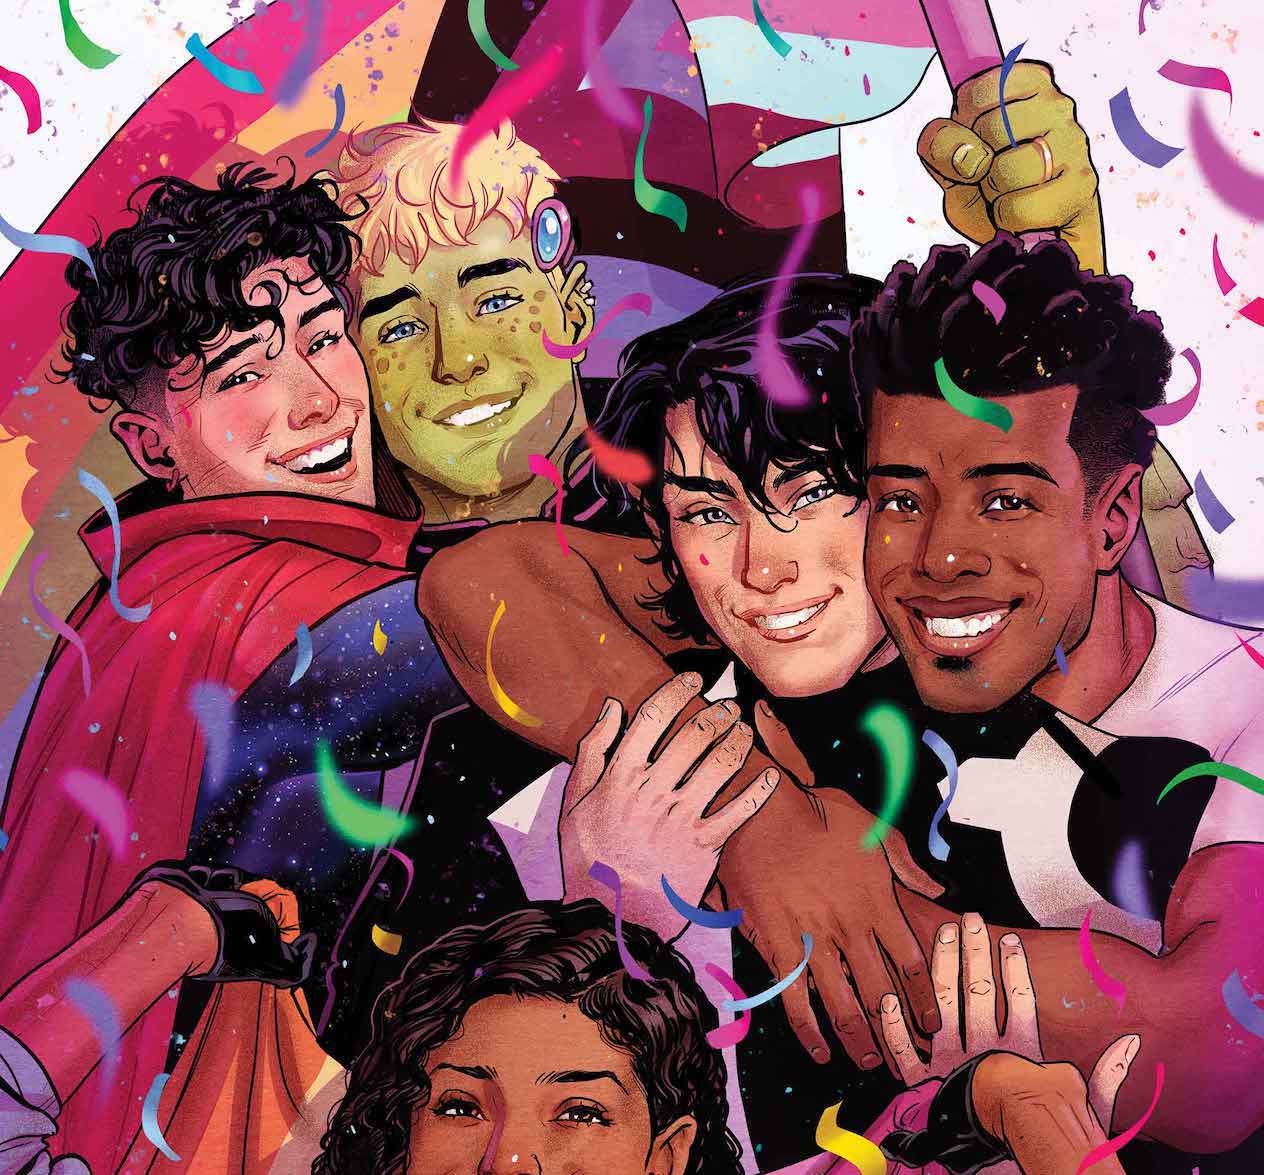 Marvel celebrates Pride Month with 'Marvel's Voices: Pride' #1 out in May